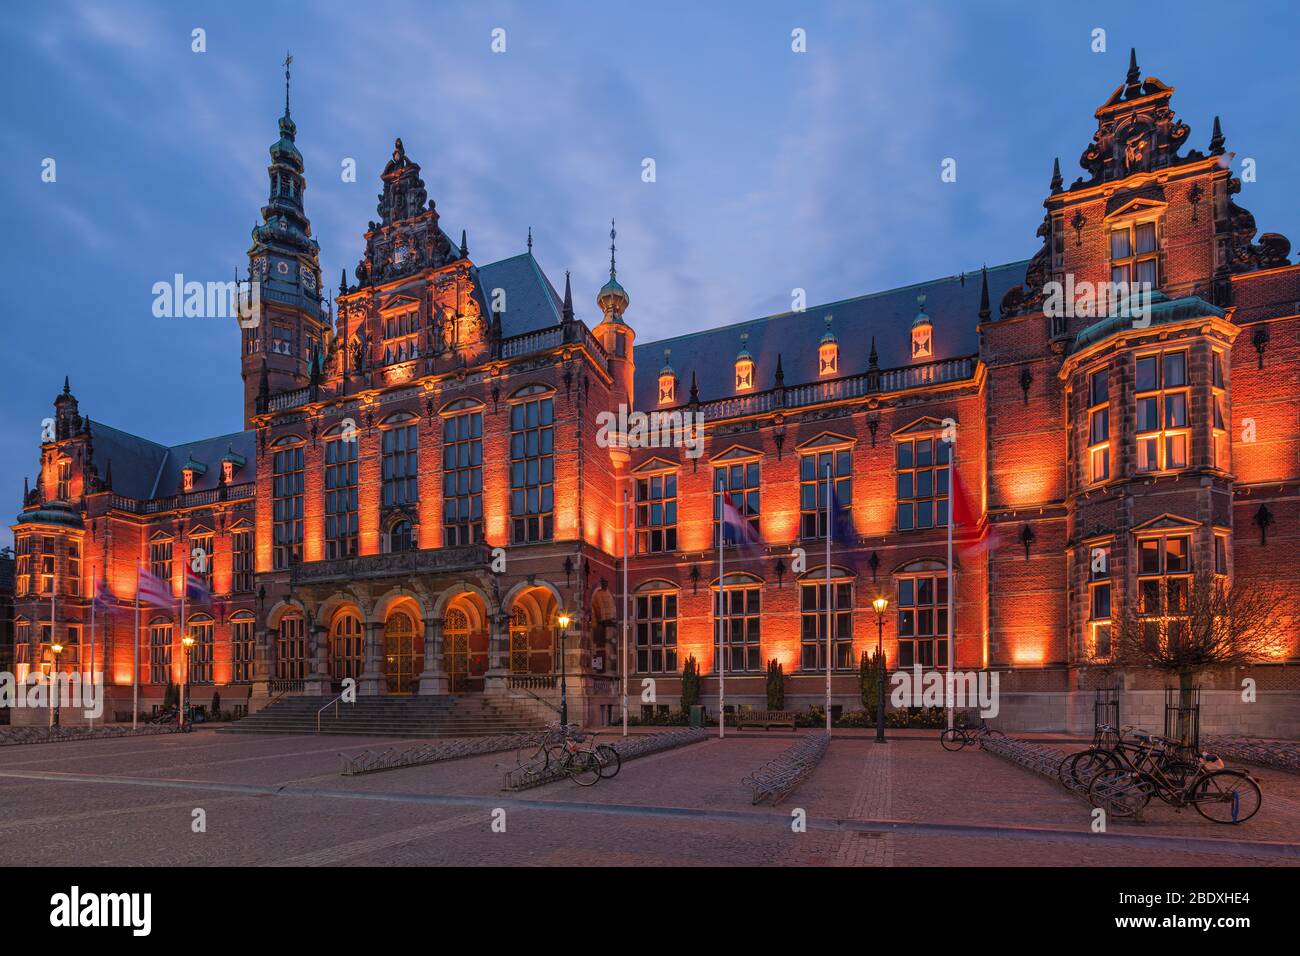 The richly decorated Academy Building, built in the Northern Dutch neo-Renaissance style, is the main building of the University of Groningen. It is l Stock Photo